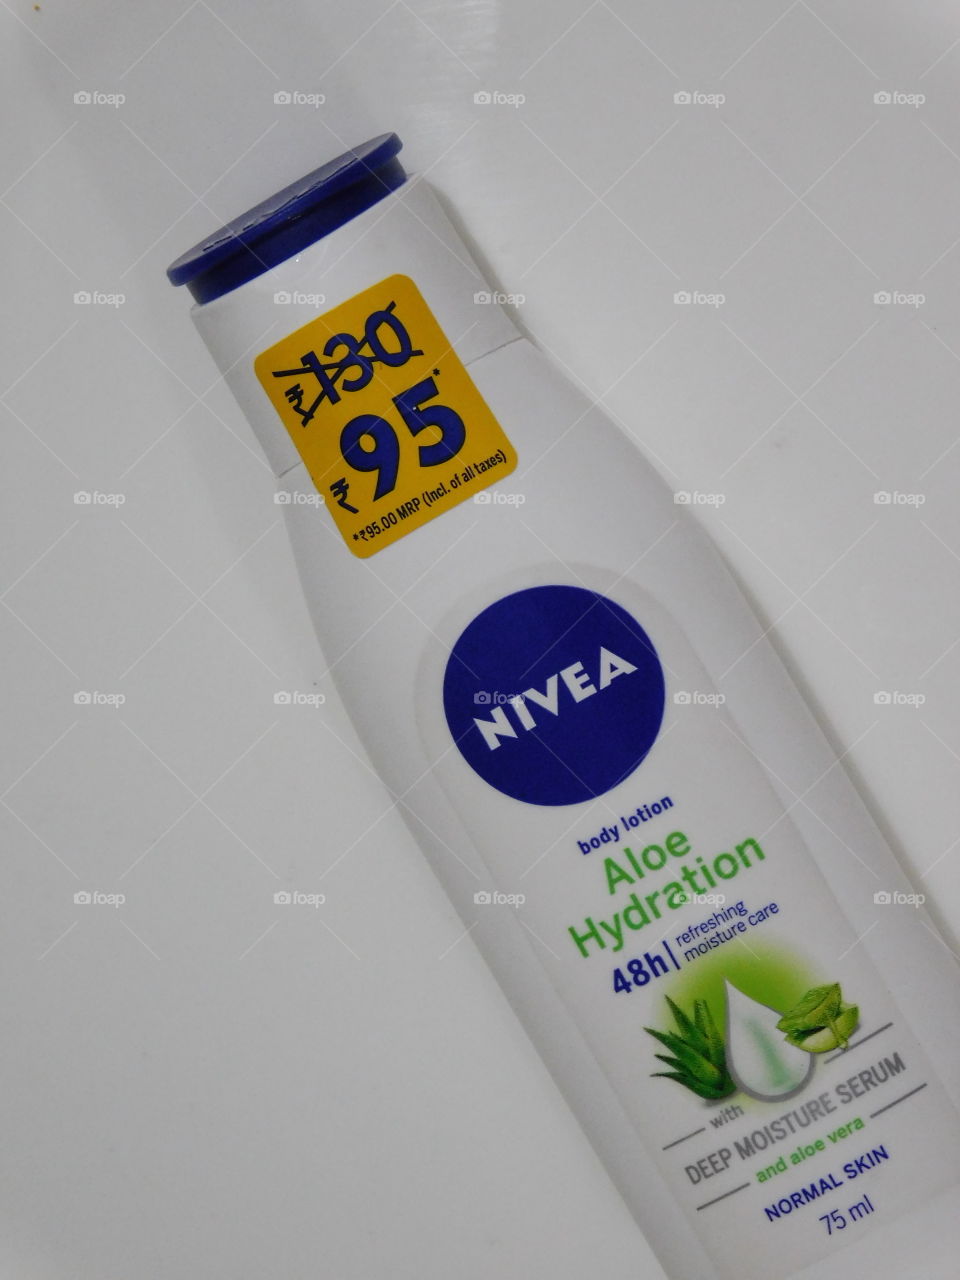 NIVEA _ Nivea Aloe Hydration body lotion with deep moisture serum and aloe Vera for normal skin .it gives your skin fast absorbing and refreshing moisturization and make it noticably smoother for the 48 hours.